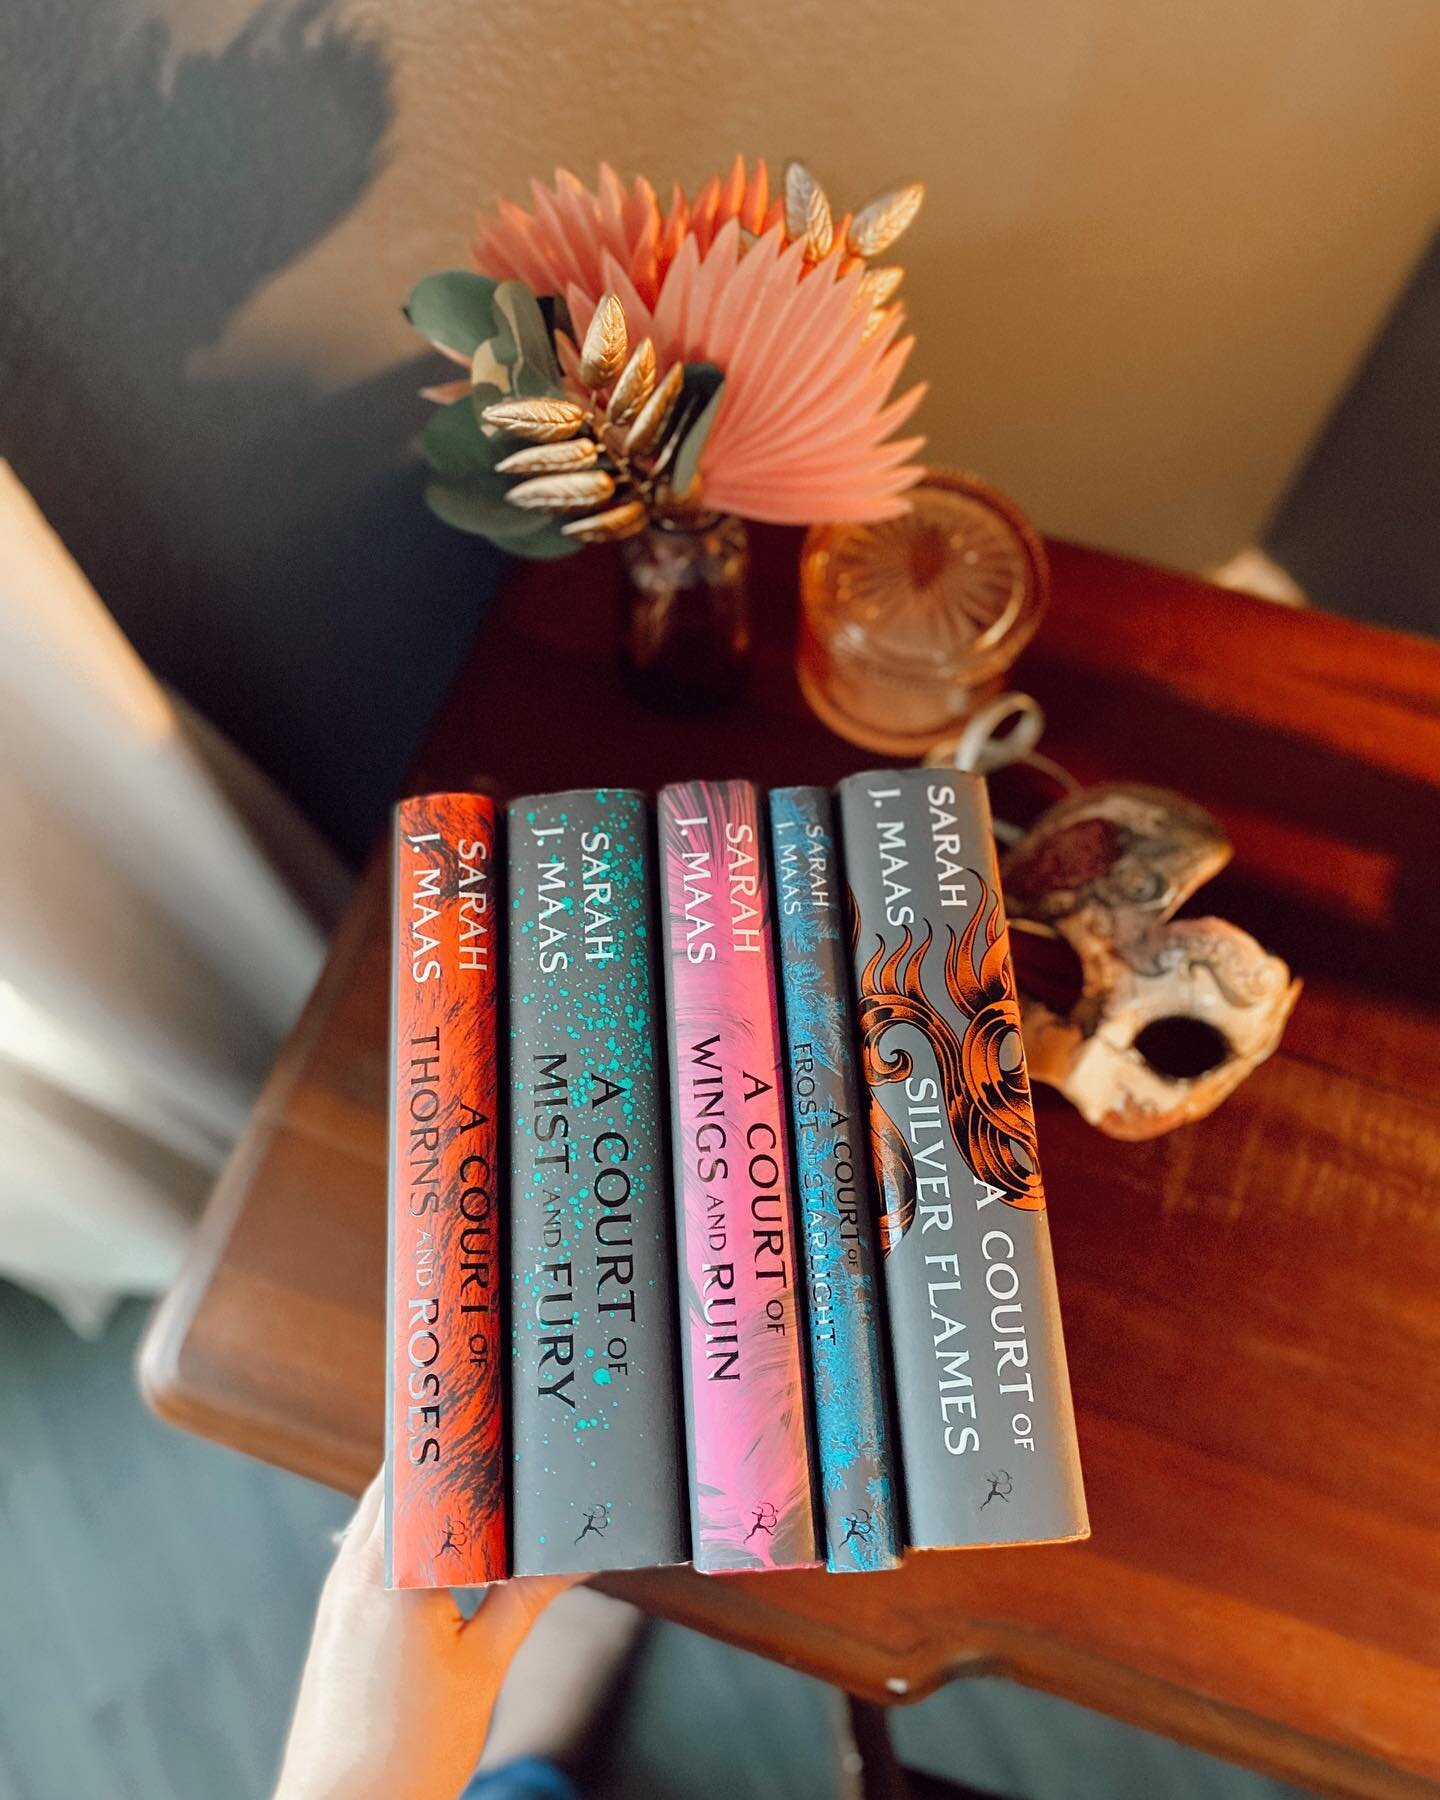 💫ACOTAR💫 The series that ended up defining my summer reading. 

I really did not expect to absolutely fall in love with this series the way I did. These books are immersive, addictive and just plain fun. I fell in love with the characters in a way 